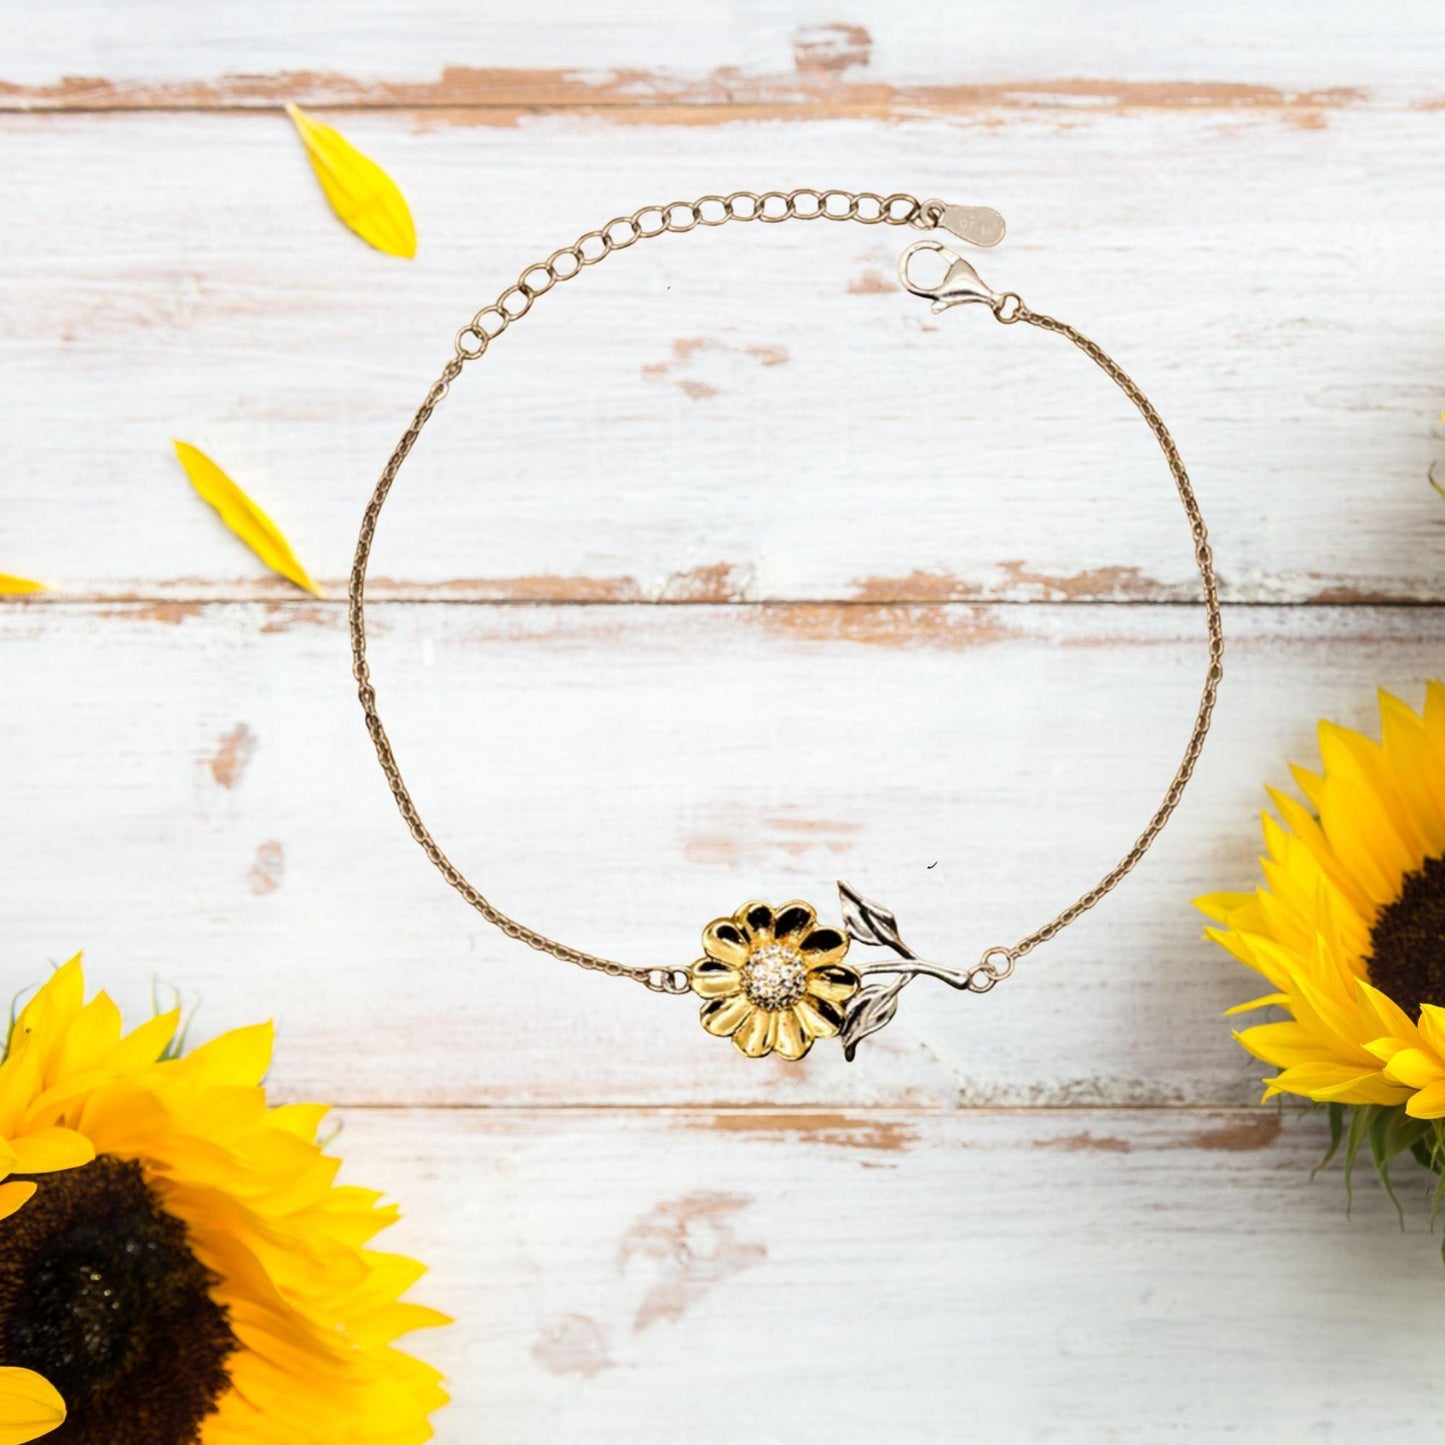 Remarkable Farmer Gifts, Your dedication and hard work, Inspirational Birthday Christmas Unique Sunflower Bracelet For Farmer, Coworkers, Men, Women, Friends - Mallard Moon Gift Shop